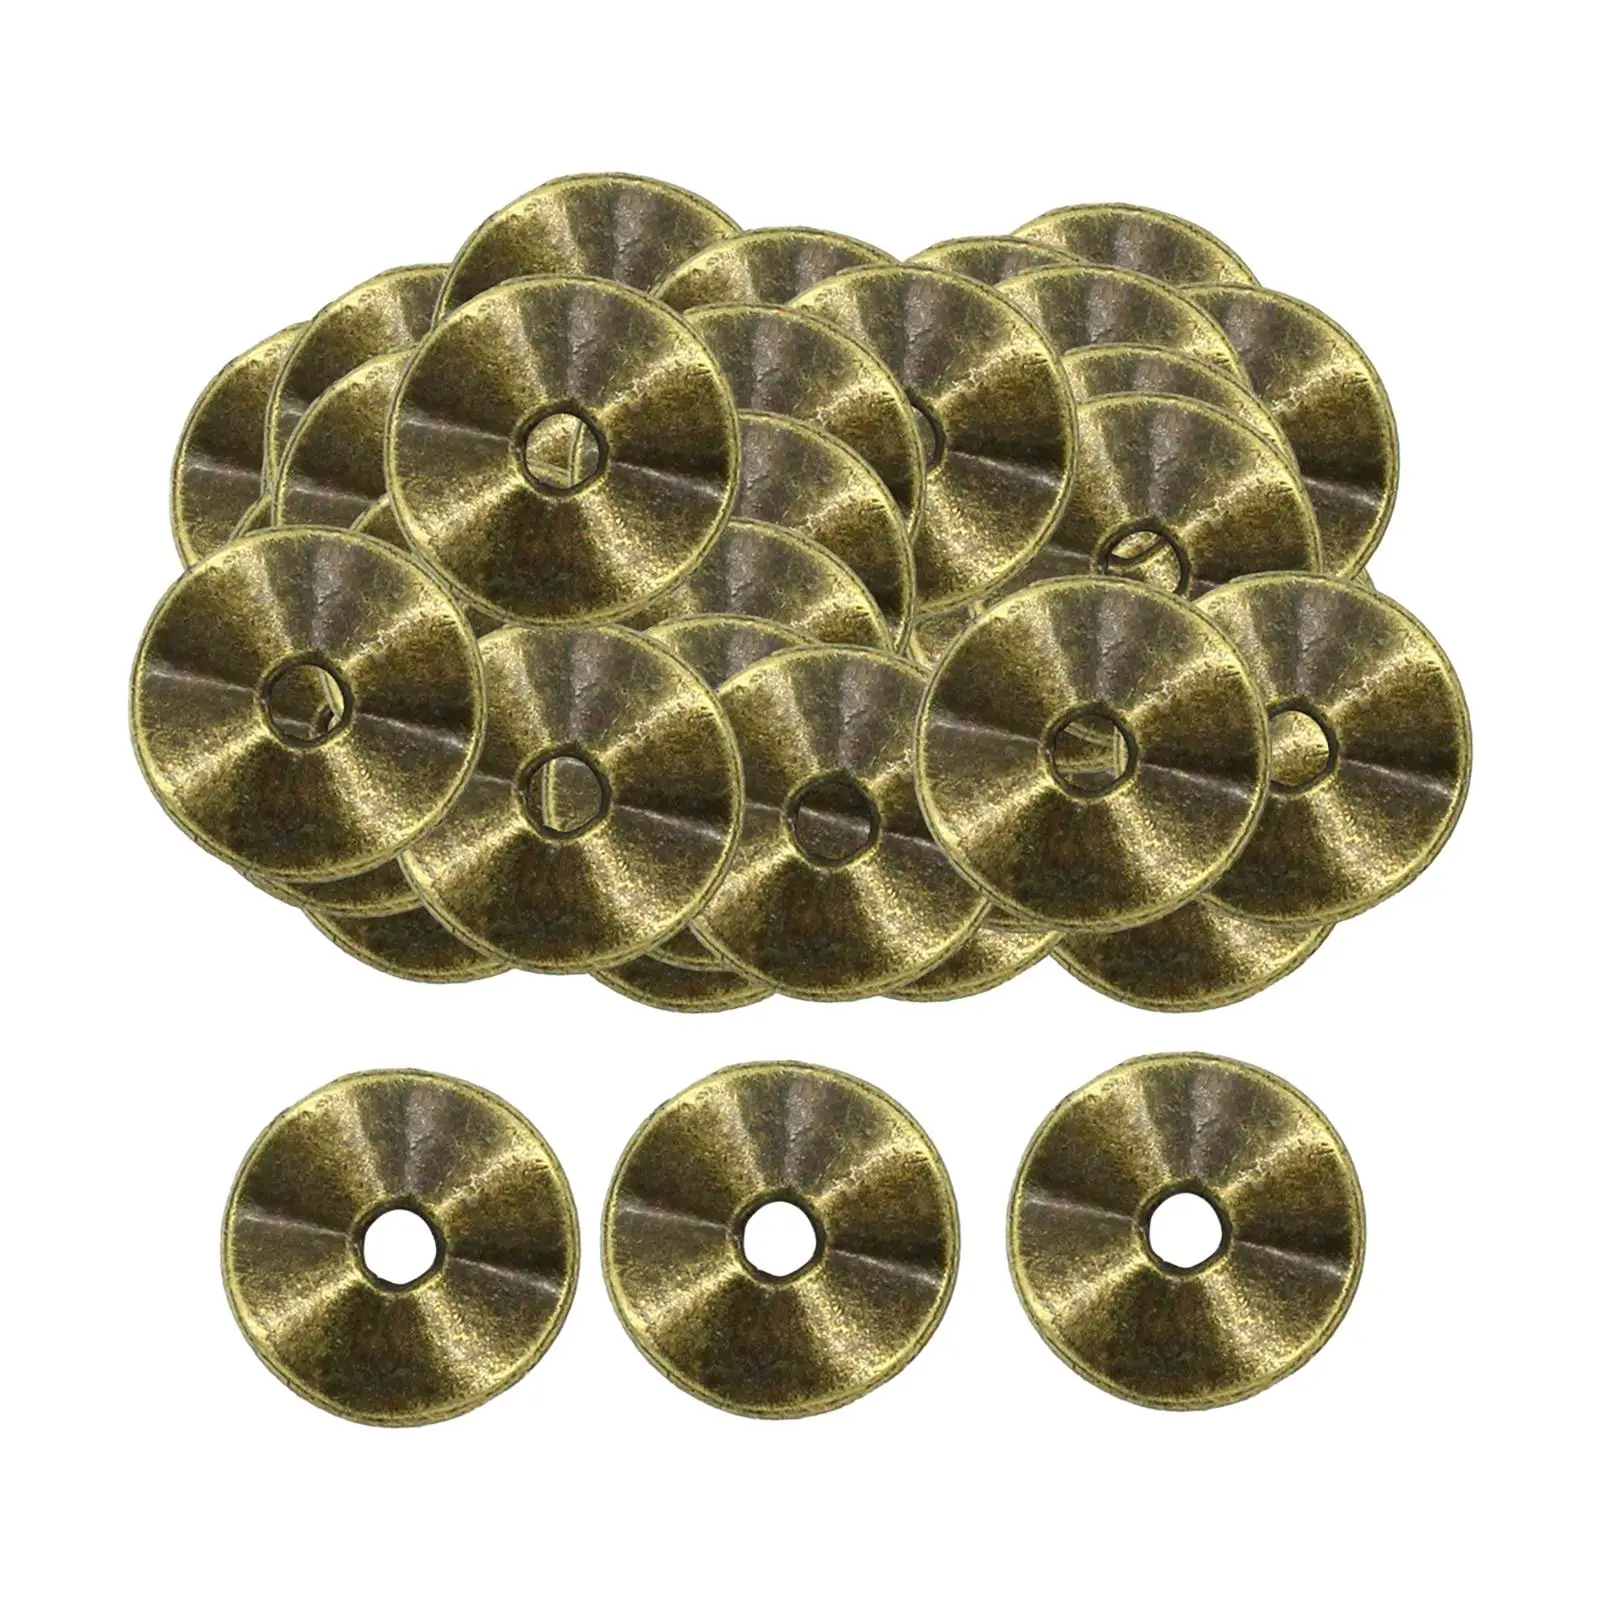 100Pcs Round Spacer Beads Accessory Ancient Bronze Color Metal 10mm for Necklace Bracelet Anklet Pendant Handmade Jewelry Making